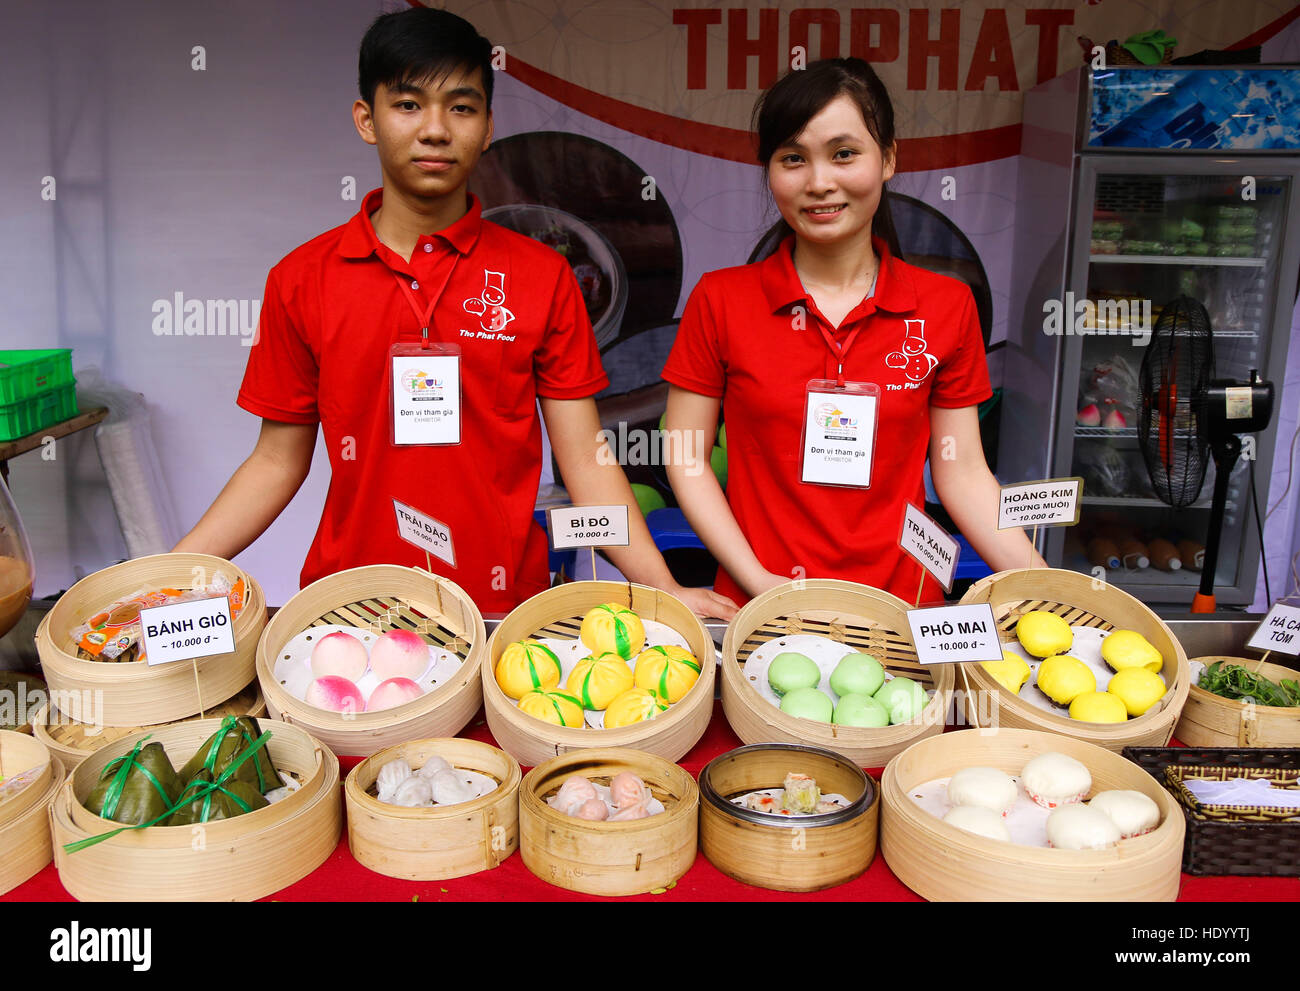 Ho Chi Minh City, Vietnam. 15th Dec, 2016. Staff introduce Chinese food at the Ho Chi Minh City International Food Festival 2016 in Ho Chi Minh City, Vietnam, Dec. 15, 2016. The Ho Chi Minh City International Food Festival 2016, held from Dec. 15 to 18, is showcasing special dishes from 18 countries and territories with a total of 150 booths. A wide range of activities, including a cooking contest, a gastronomy photo exhibition, bartender demonstrations and music shows will also be held during the event. © Hoang Thi Huong/Xinhua/Alamy Live News Stock Photo